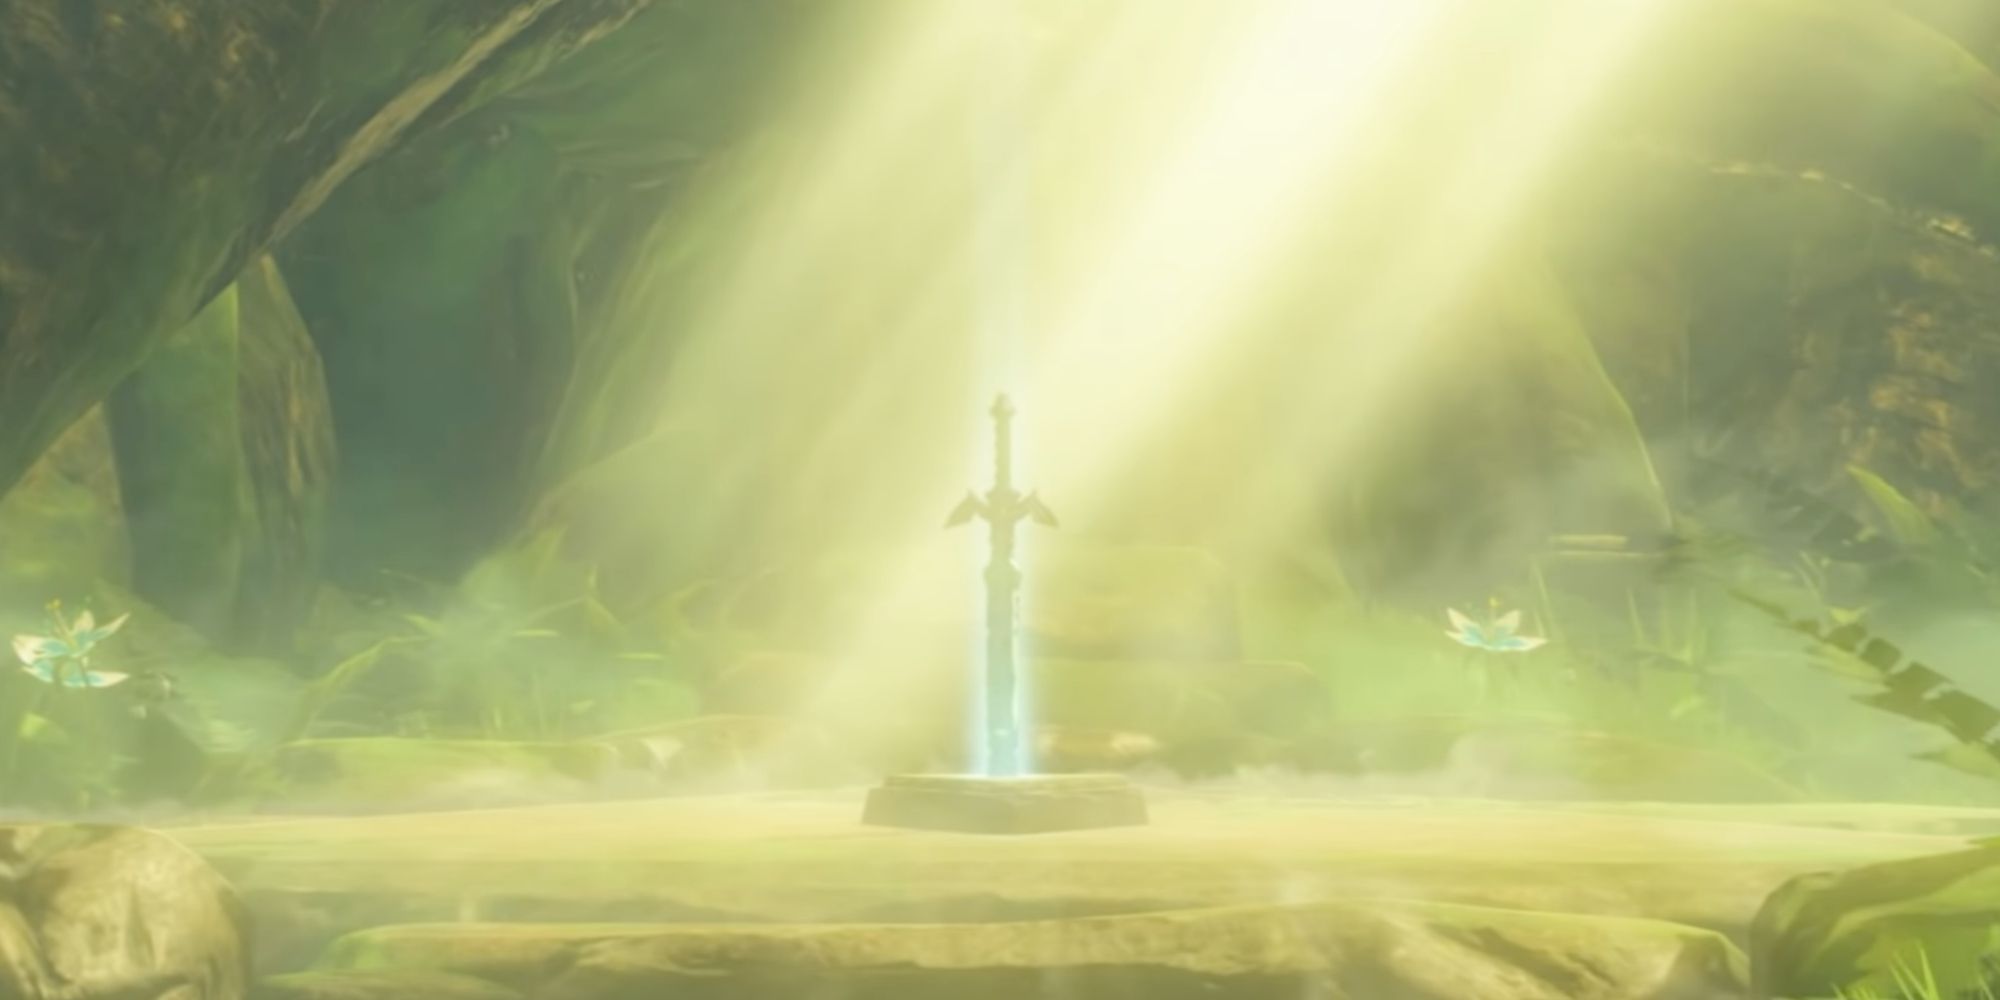 The Master Sword in the Korok Forest From The Legend of Zelda: Breath of The Wild